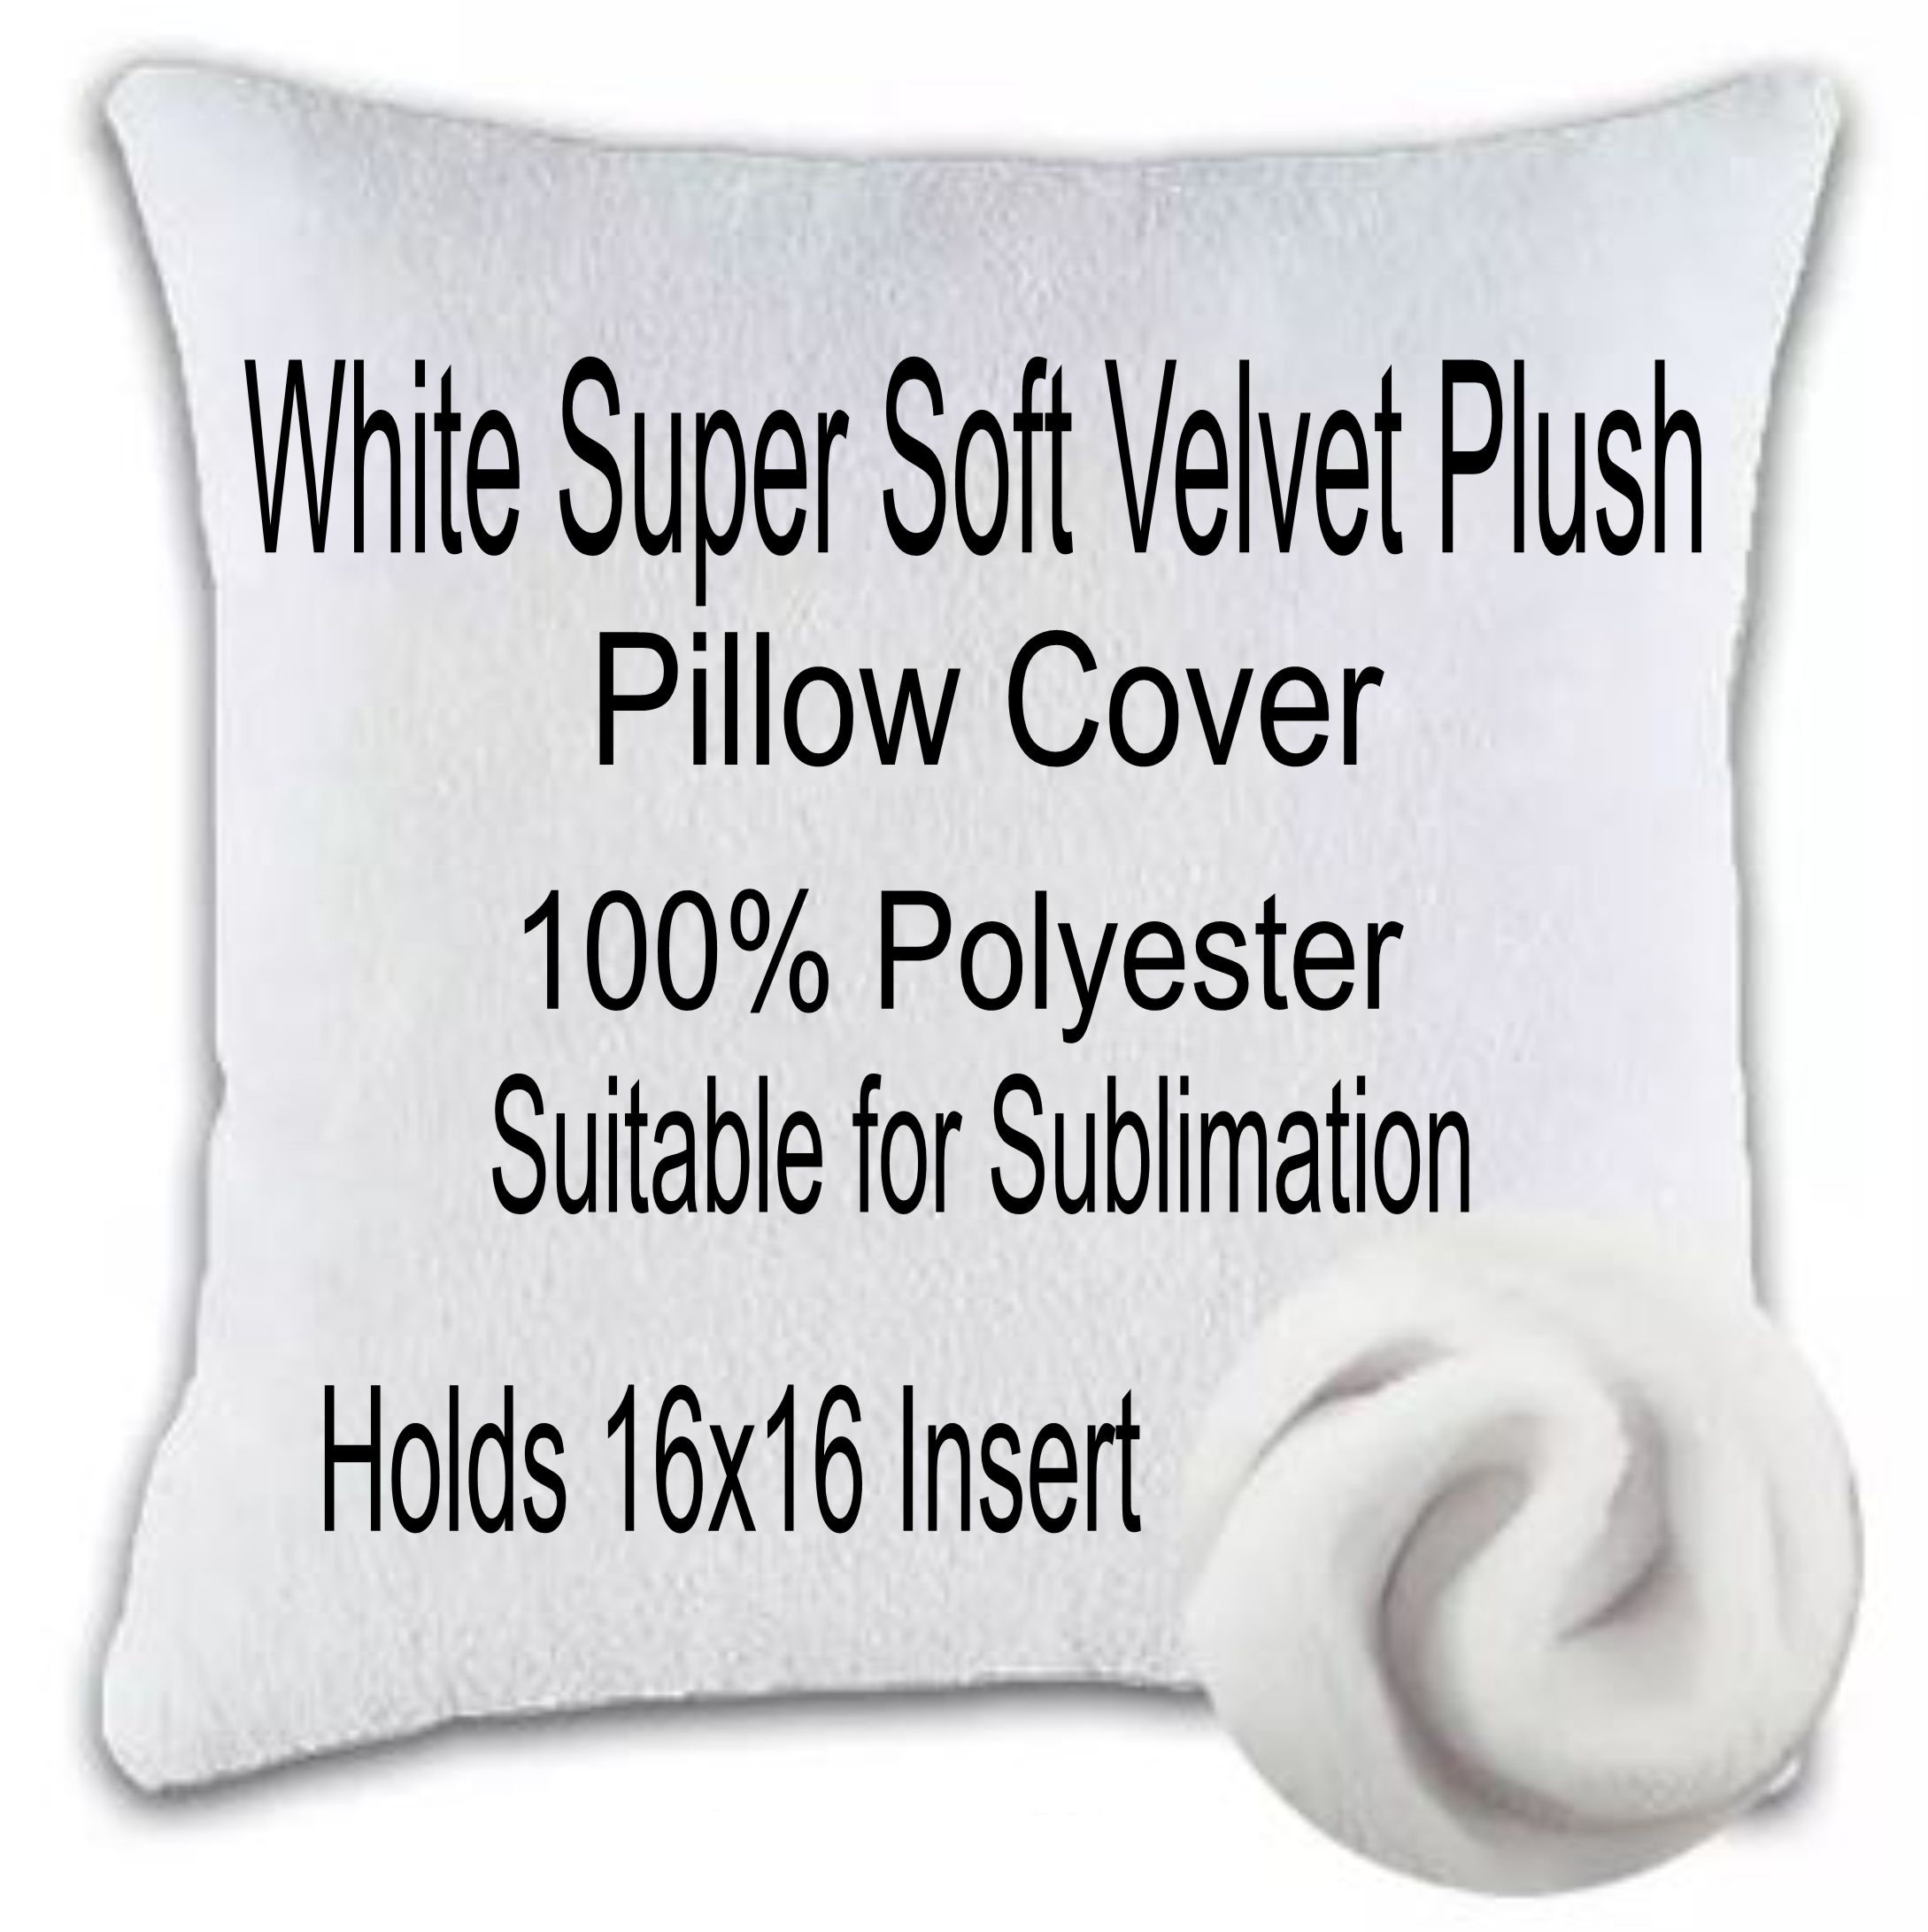 Mainstays Decorative Pillow Insert 100% Polyester 18x18 Set of 2 